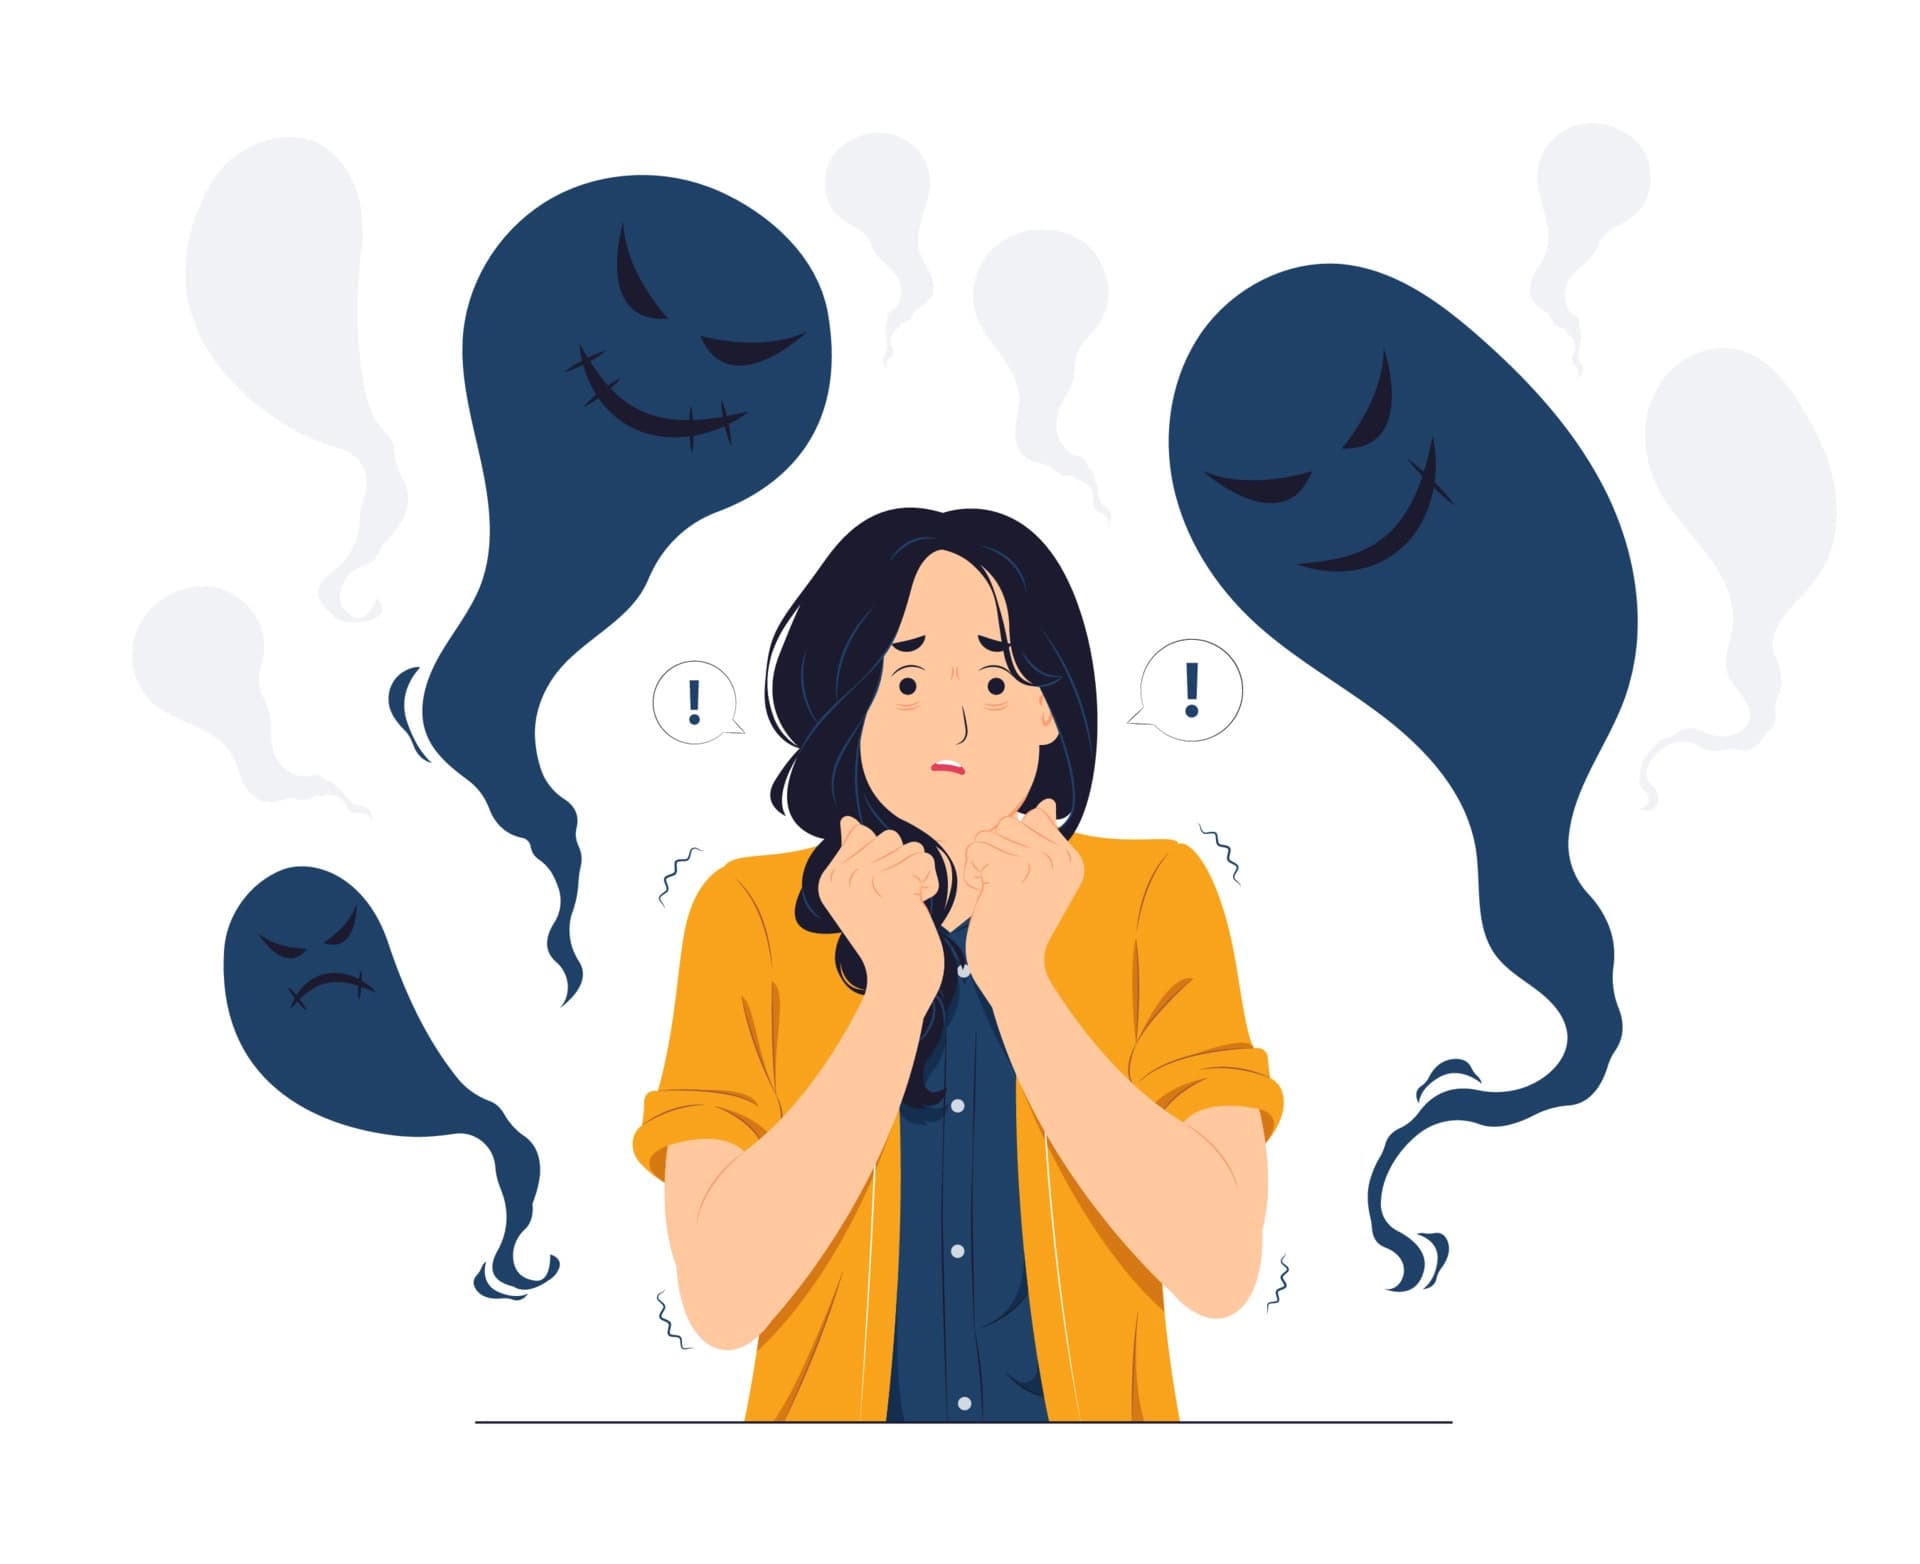 woman-with-schizophrenia-post-traumatic-stress-mental-disorder-shocked-scared-panic-anxiety-frustrated-fear-and-terrified-concept-illustration-free-vector